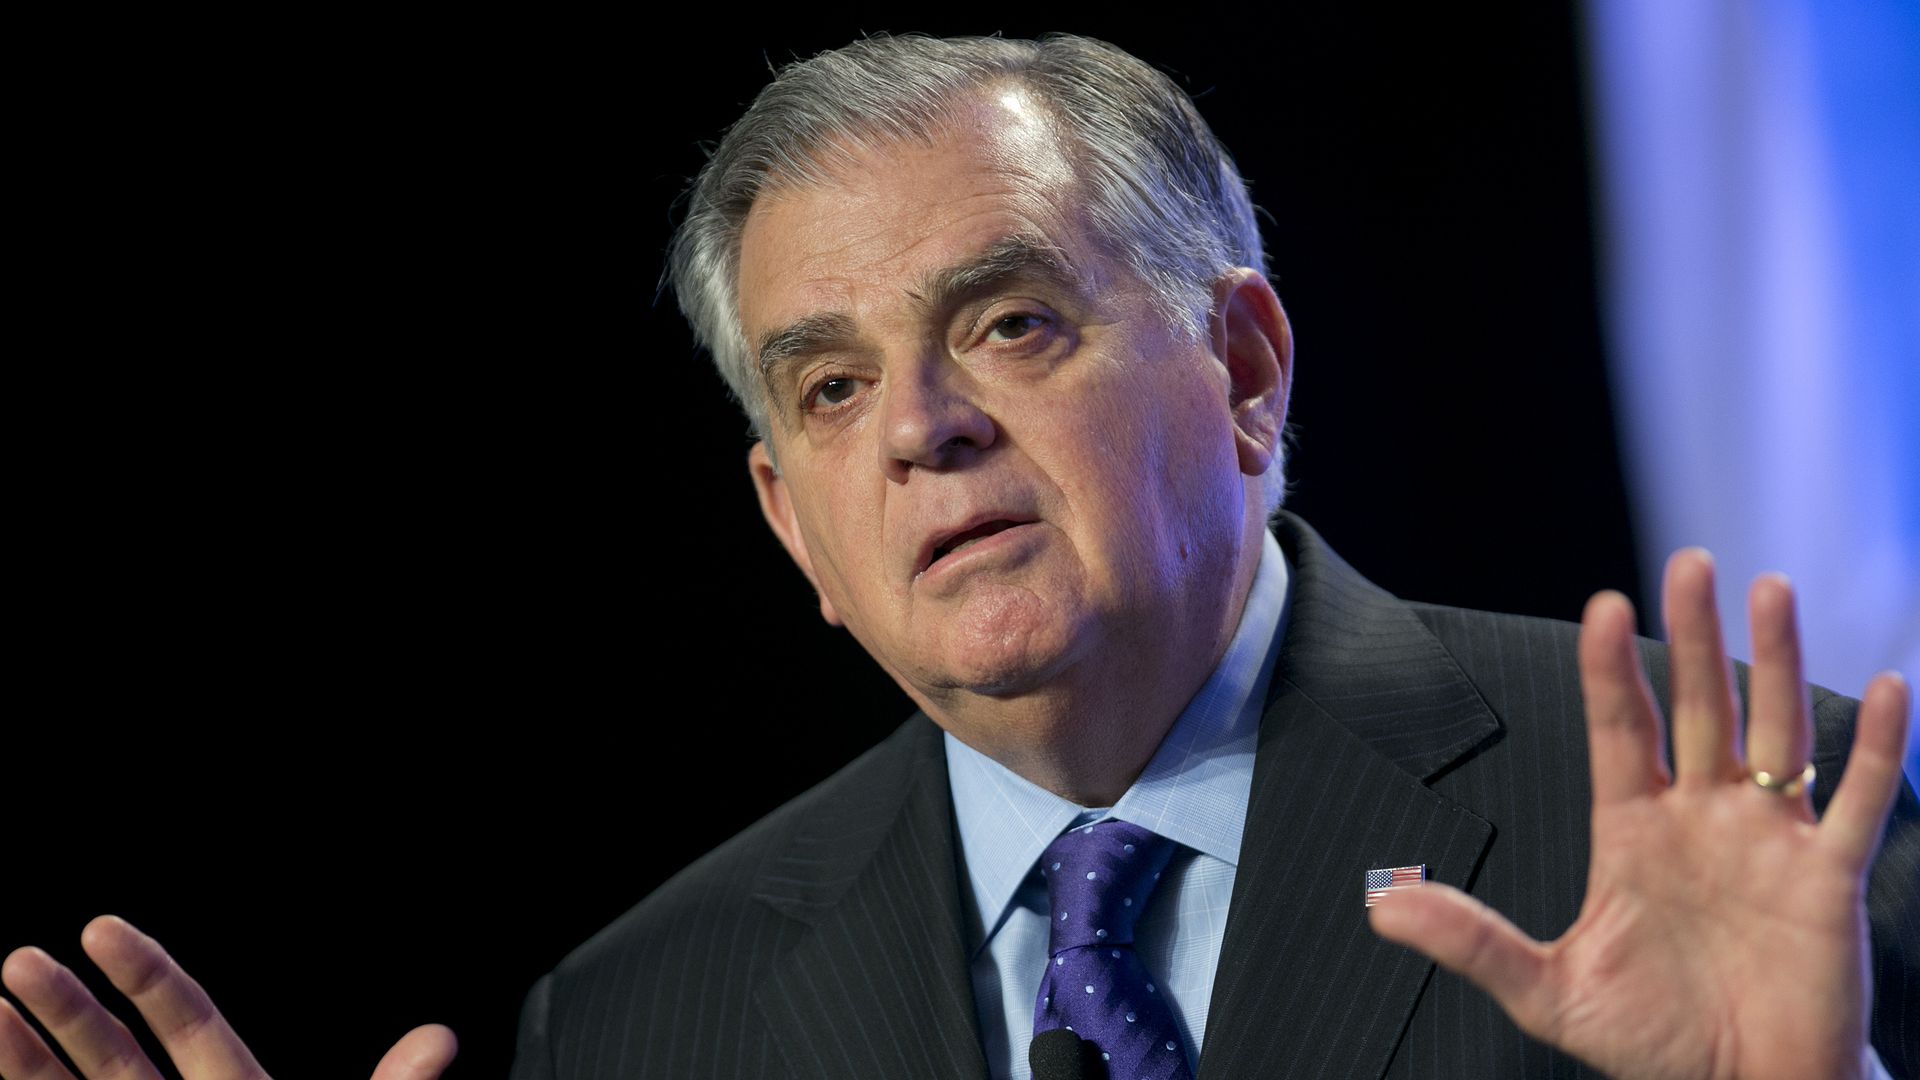 Ray LaHood, U.S. secretary of transportation, speaks during the U.S. Export-Import Bank annual conference in Washington, D.C., U.S., on Friday, April 5, 2013. 